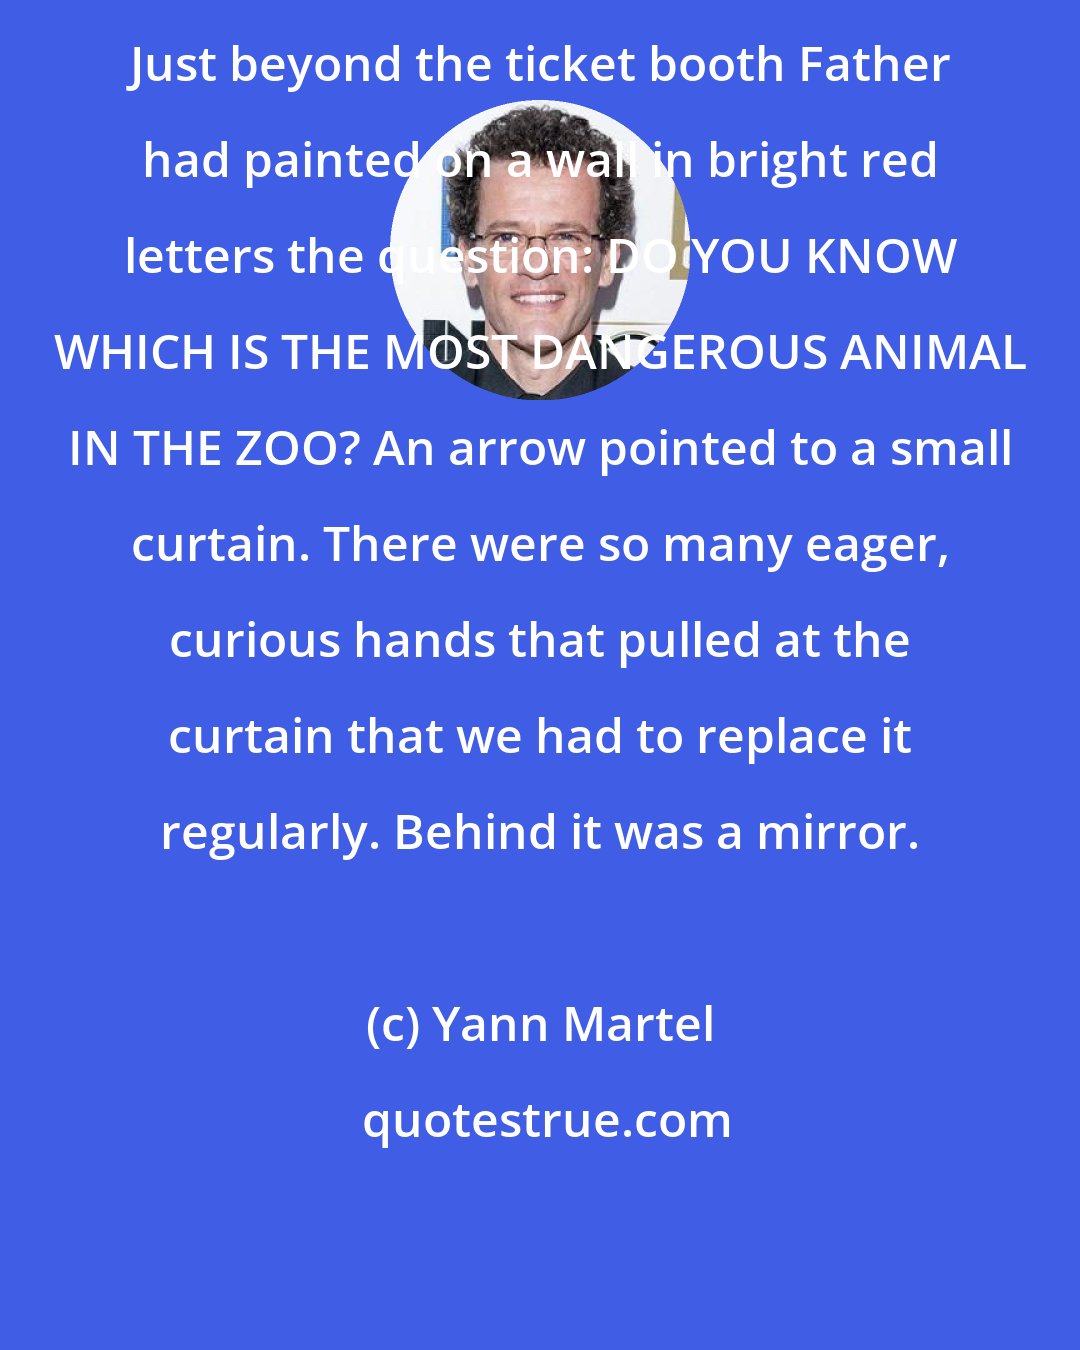 Yann Martel: Just beyond the ticket booth Father had painted on a wall in bright red letters the question: DO YOU KNOW WHICH IS THE MOST DANGEROUS ANIMAL IN THE ZOO? An arrow pointed to a small curtain. There were so many eager, curious hands that pulled at the curtain that we had to replace it regularly. Behind it was a mirror.